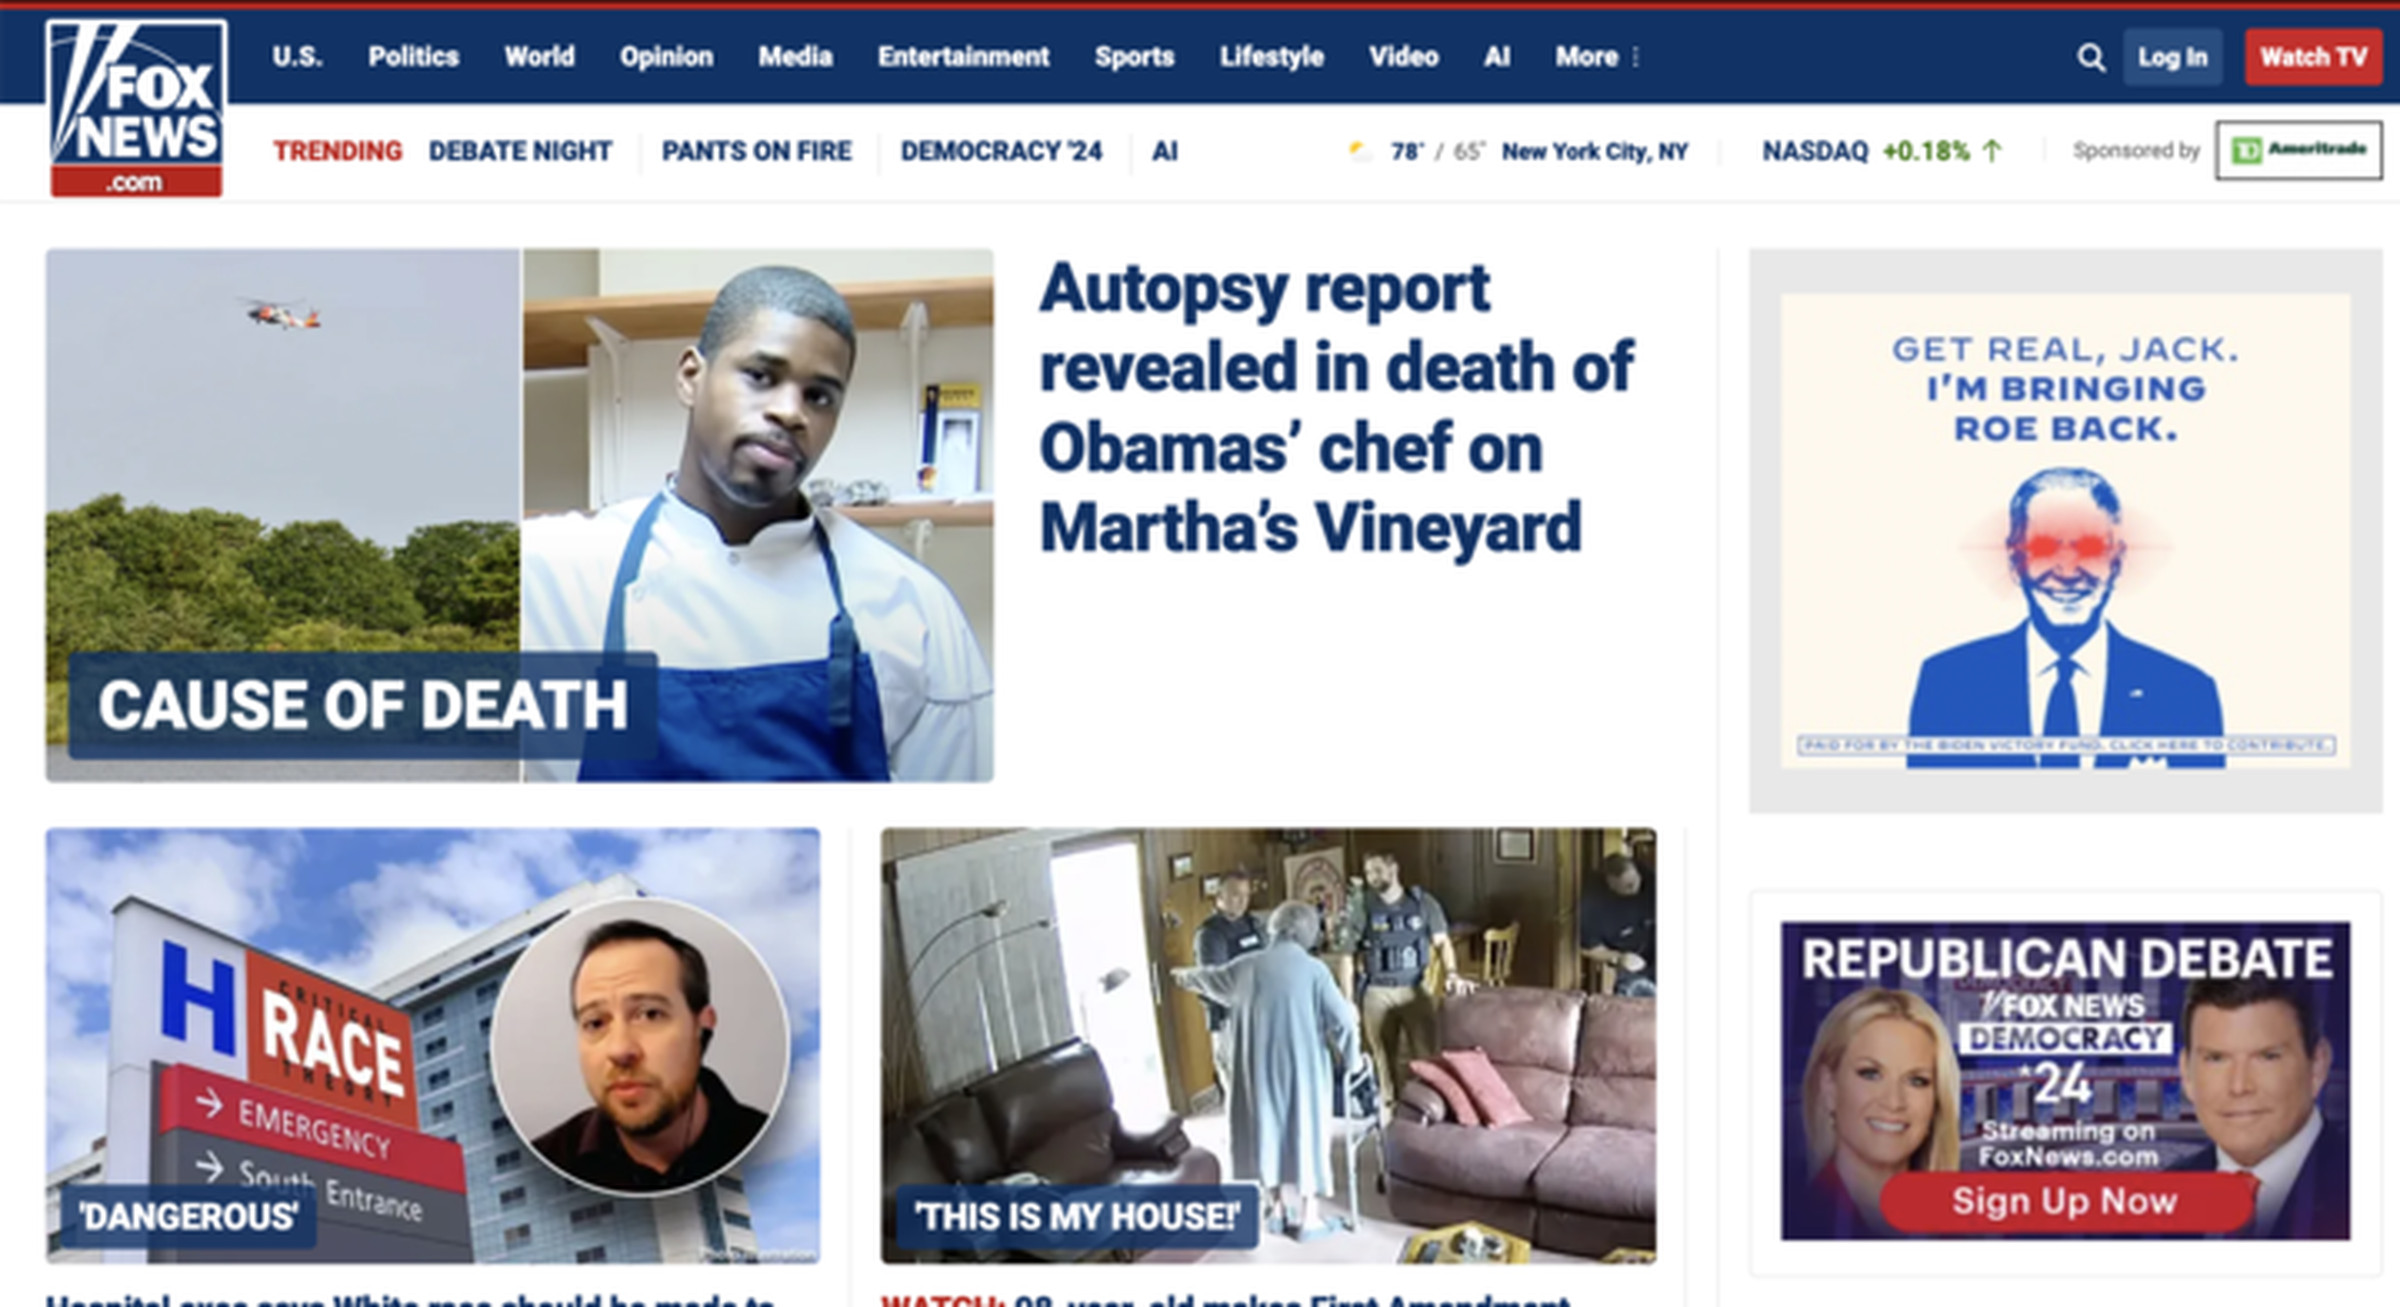 A screenshot of the Fox News website with a “Dark Brandon” ad in the upper right corner.